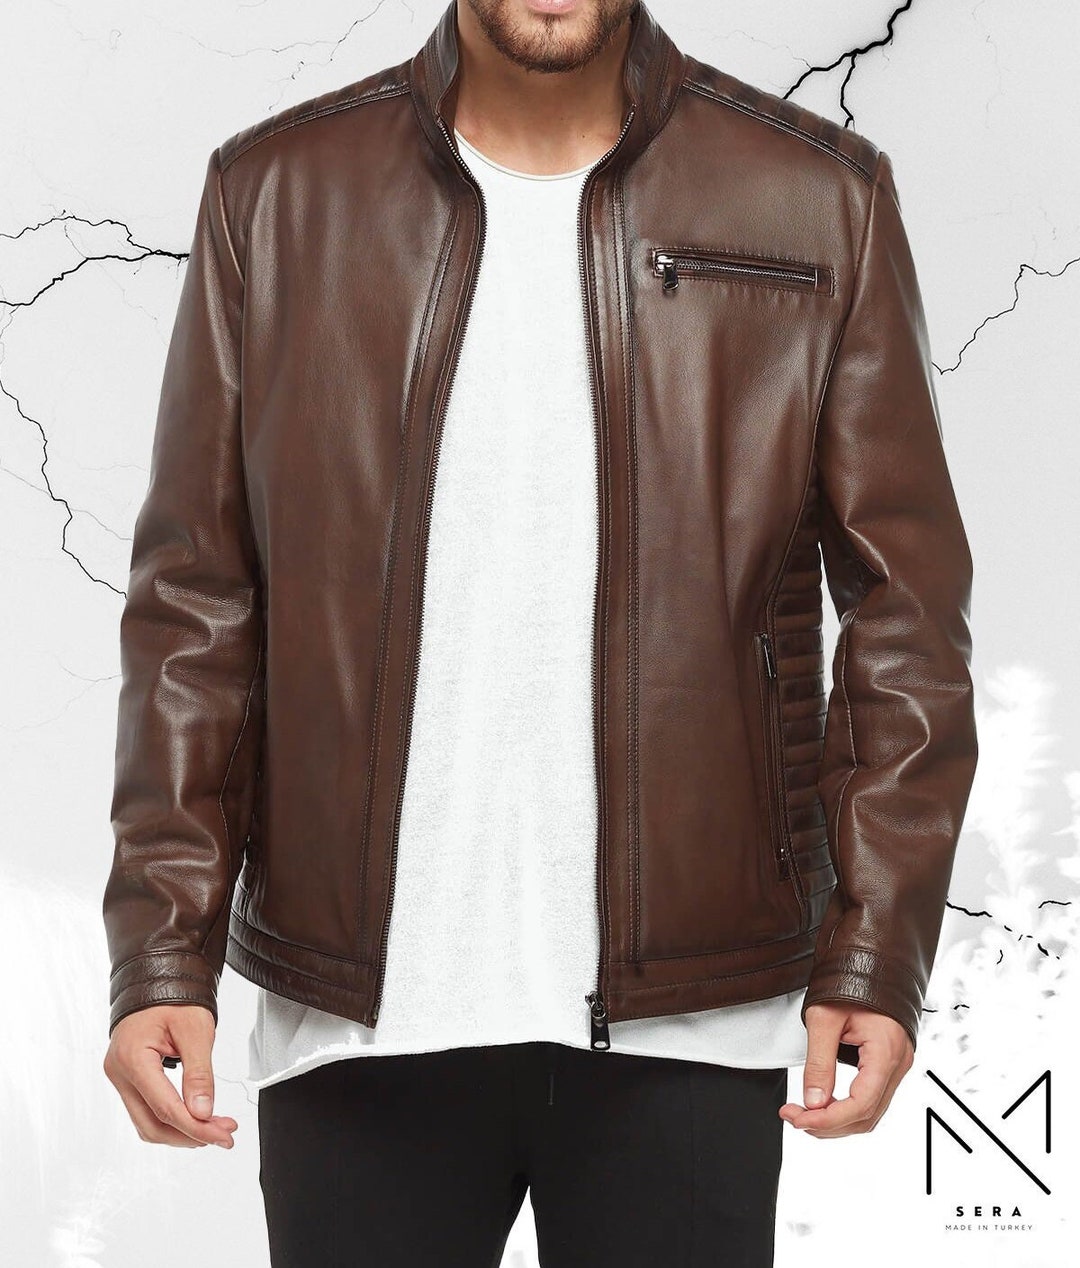 Men Custom Tailored Genuine Leather Jacket Brown Leather - Etsy